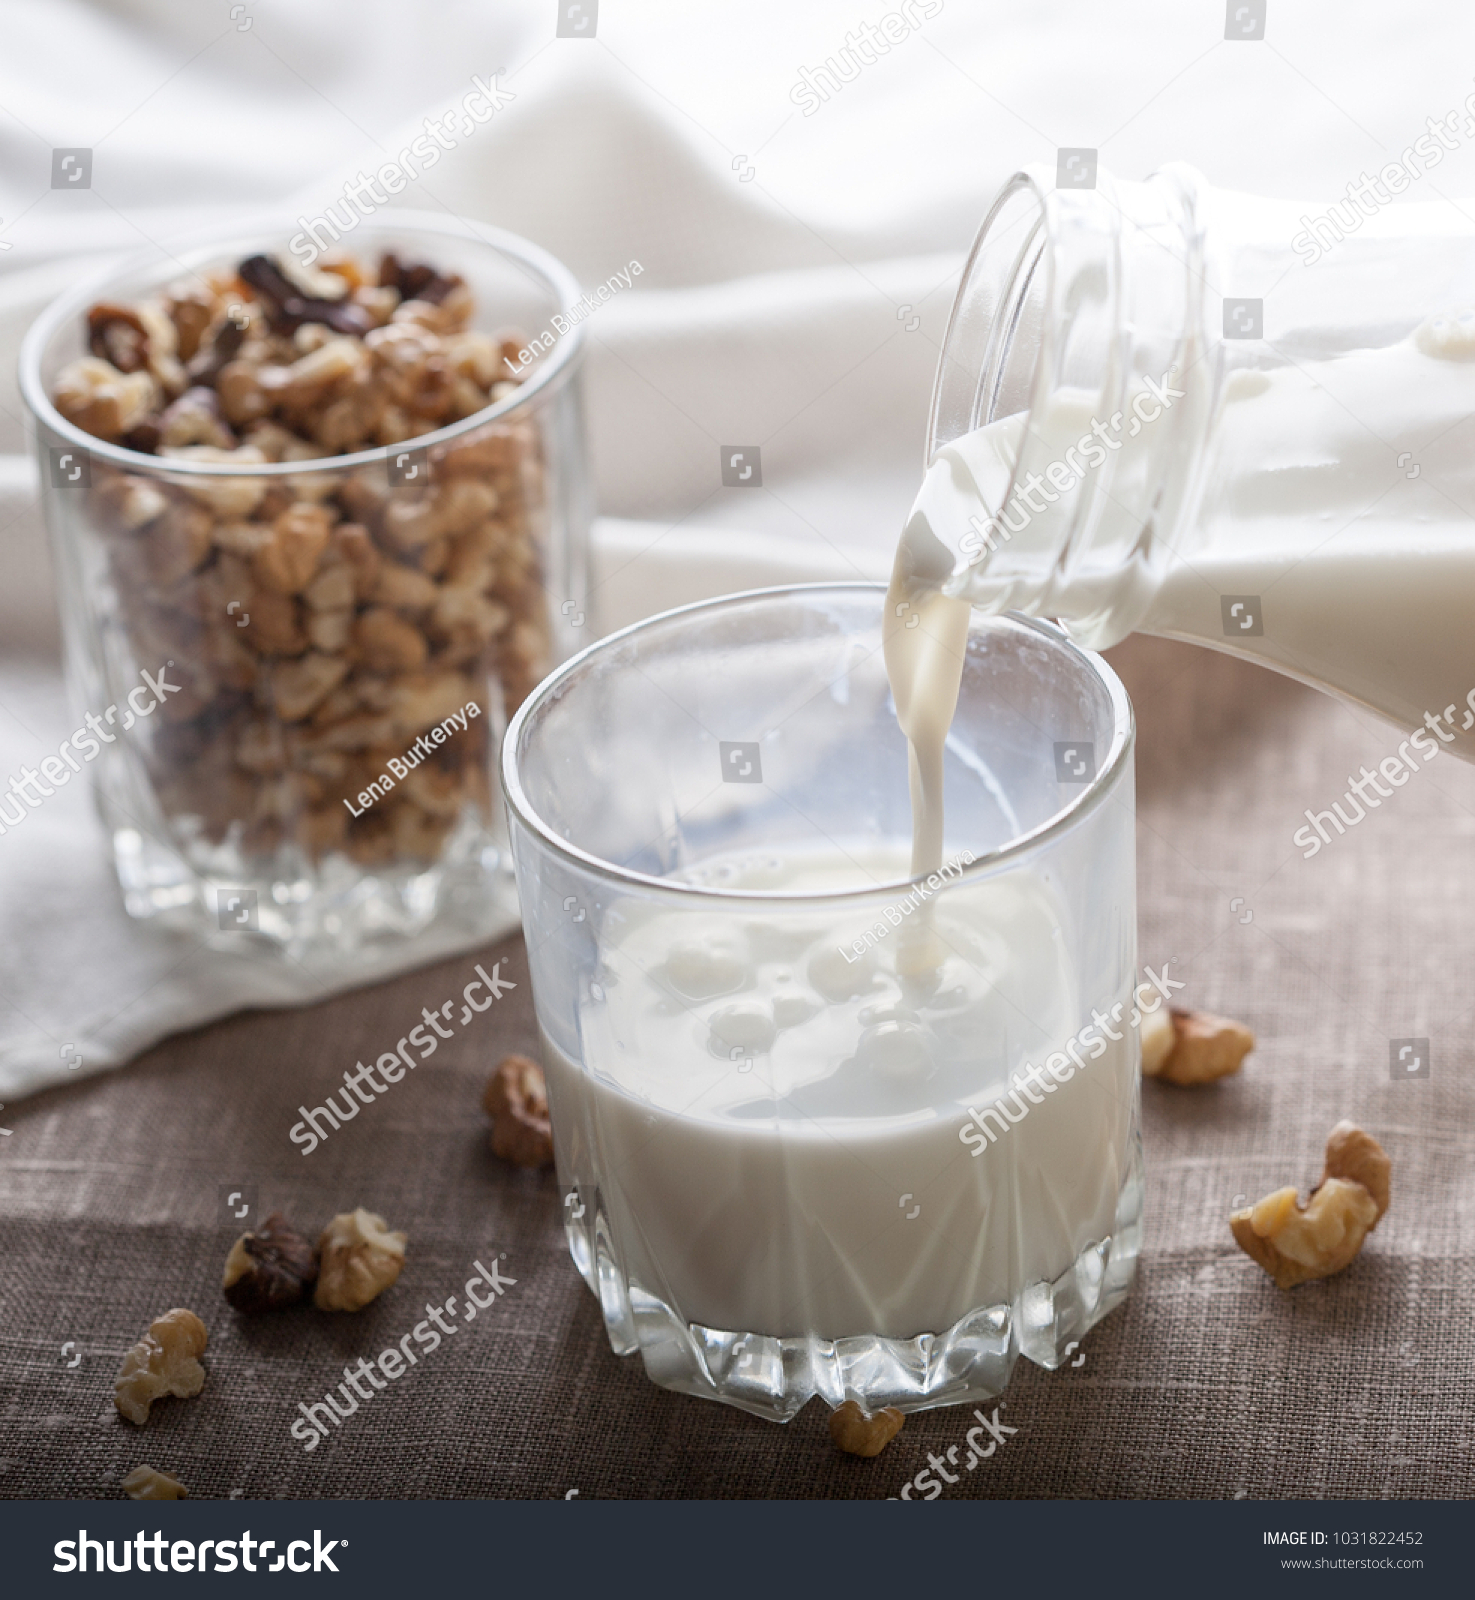 Pouring nut milk from bottle to a glass of milk  #1031822452